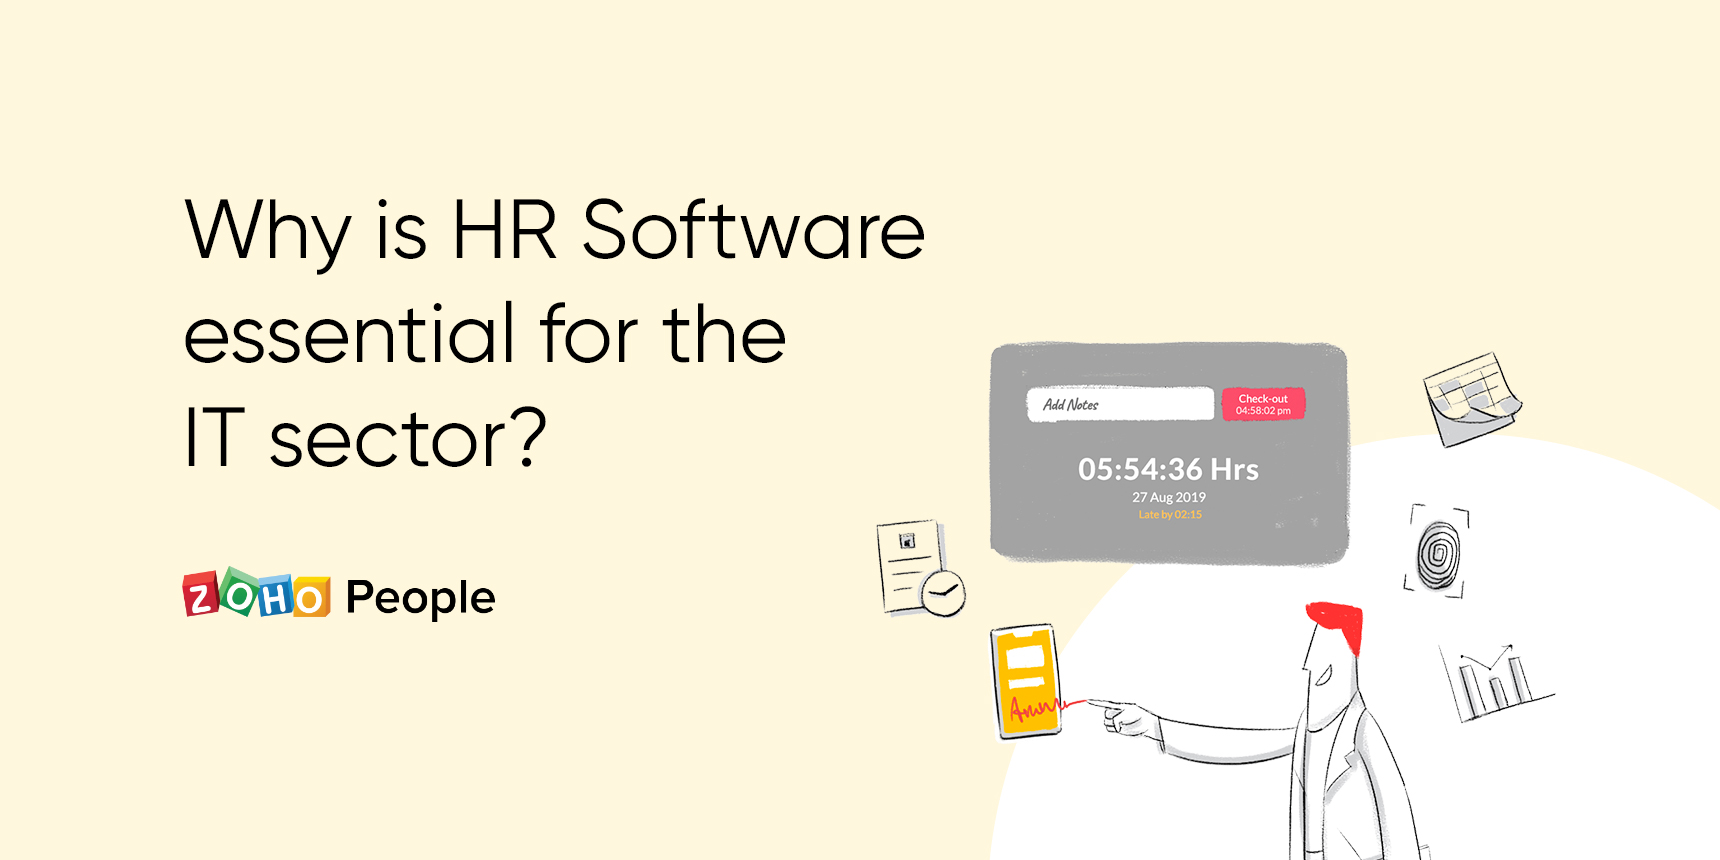 How can HR software benefit the IT sector?